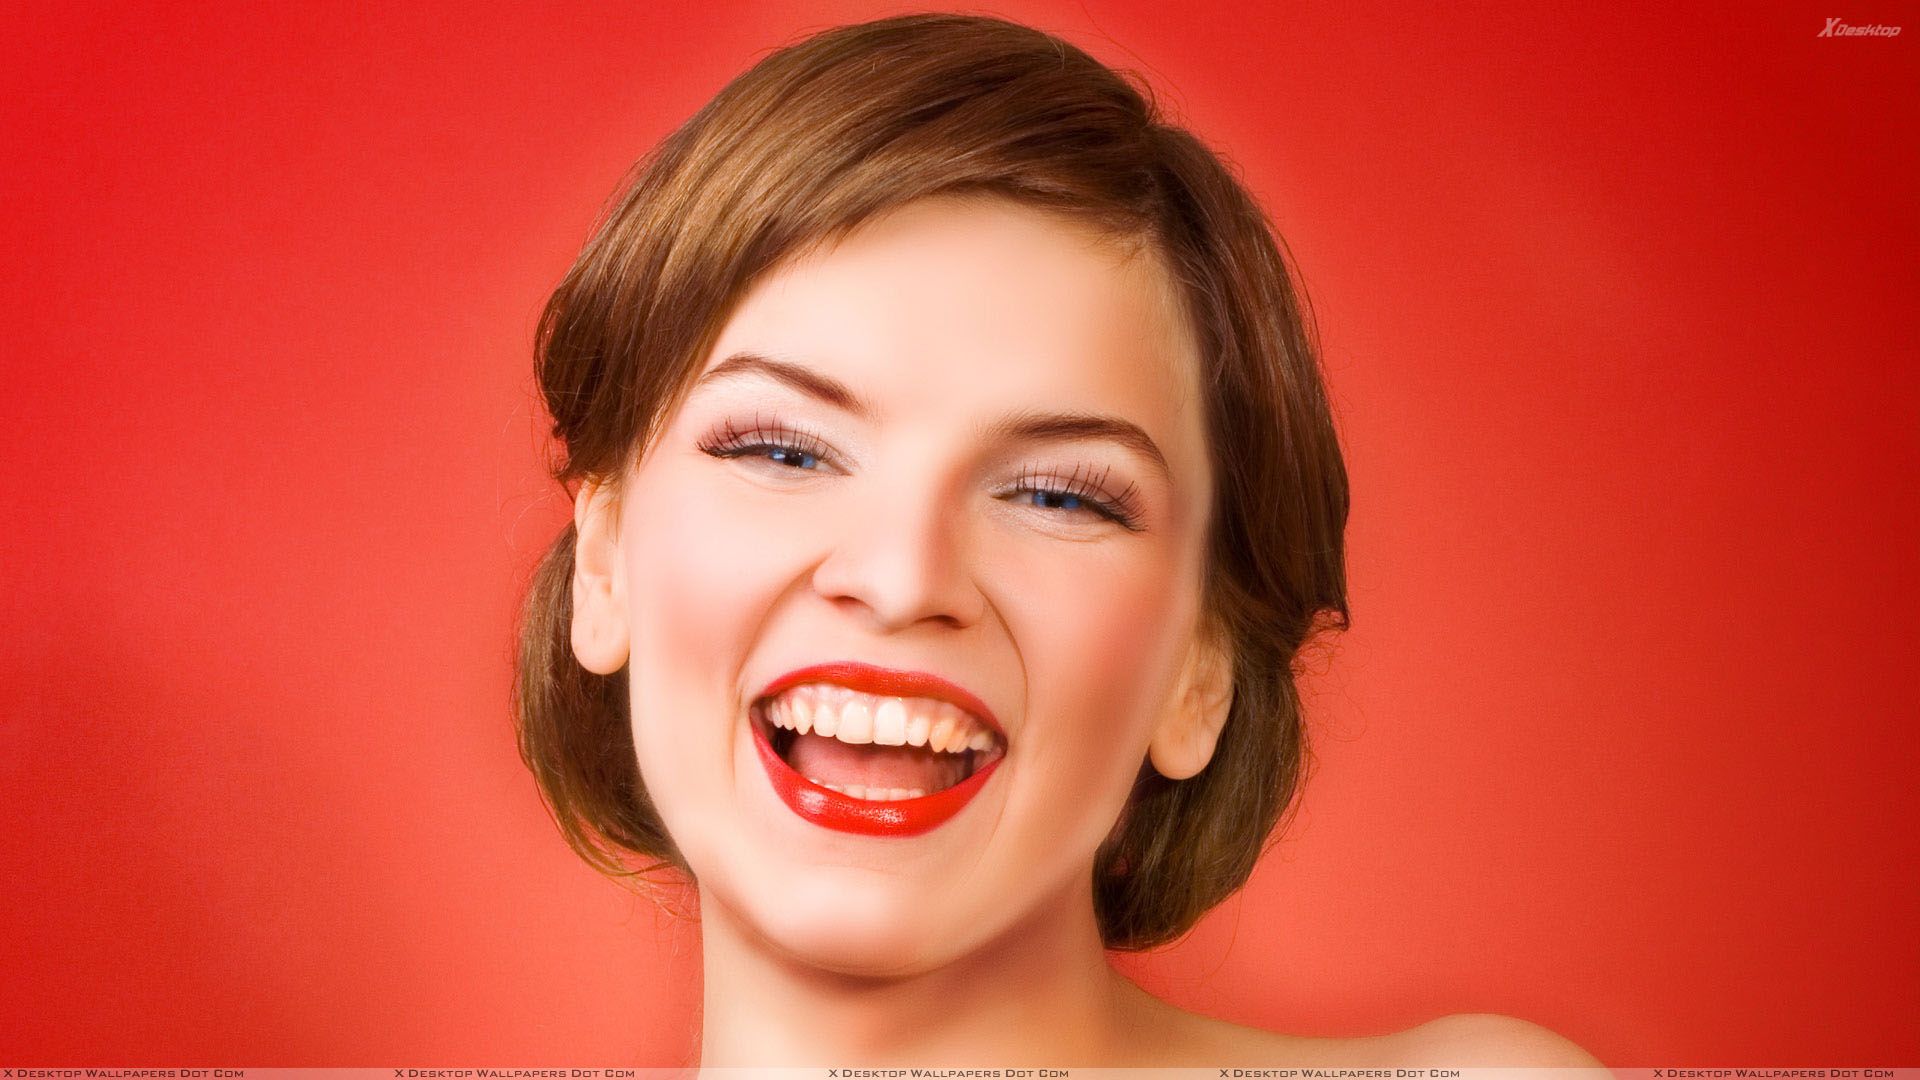 Girl Laughing Madly Face Closeup & Red .xdesktopwallpaper.com